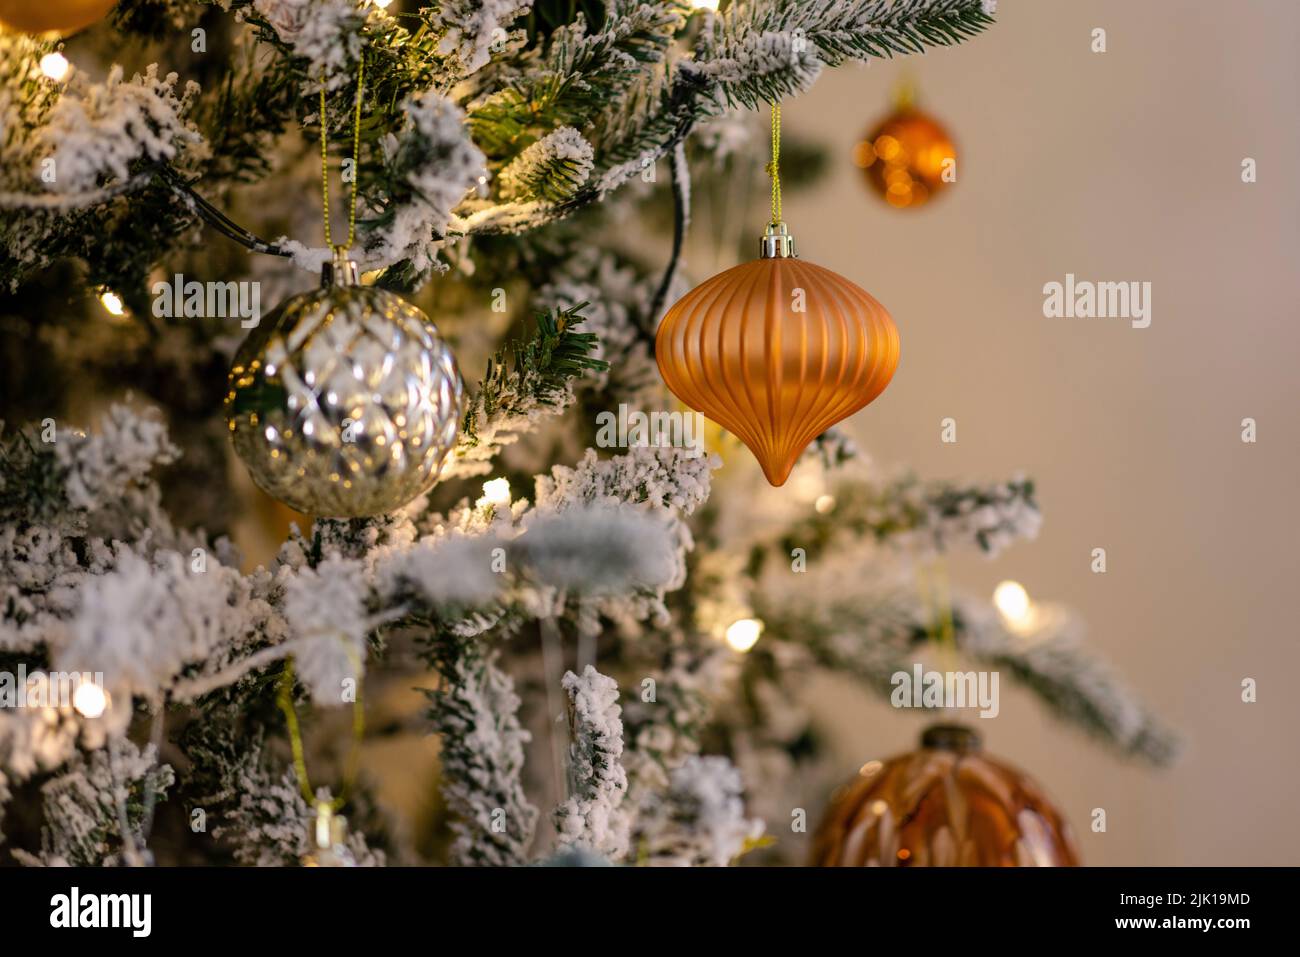 A close-up shot of a Christmas tree decorated with golden-orange shiny balls and lights. Stock Photo